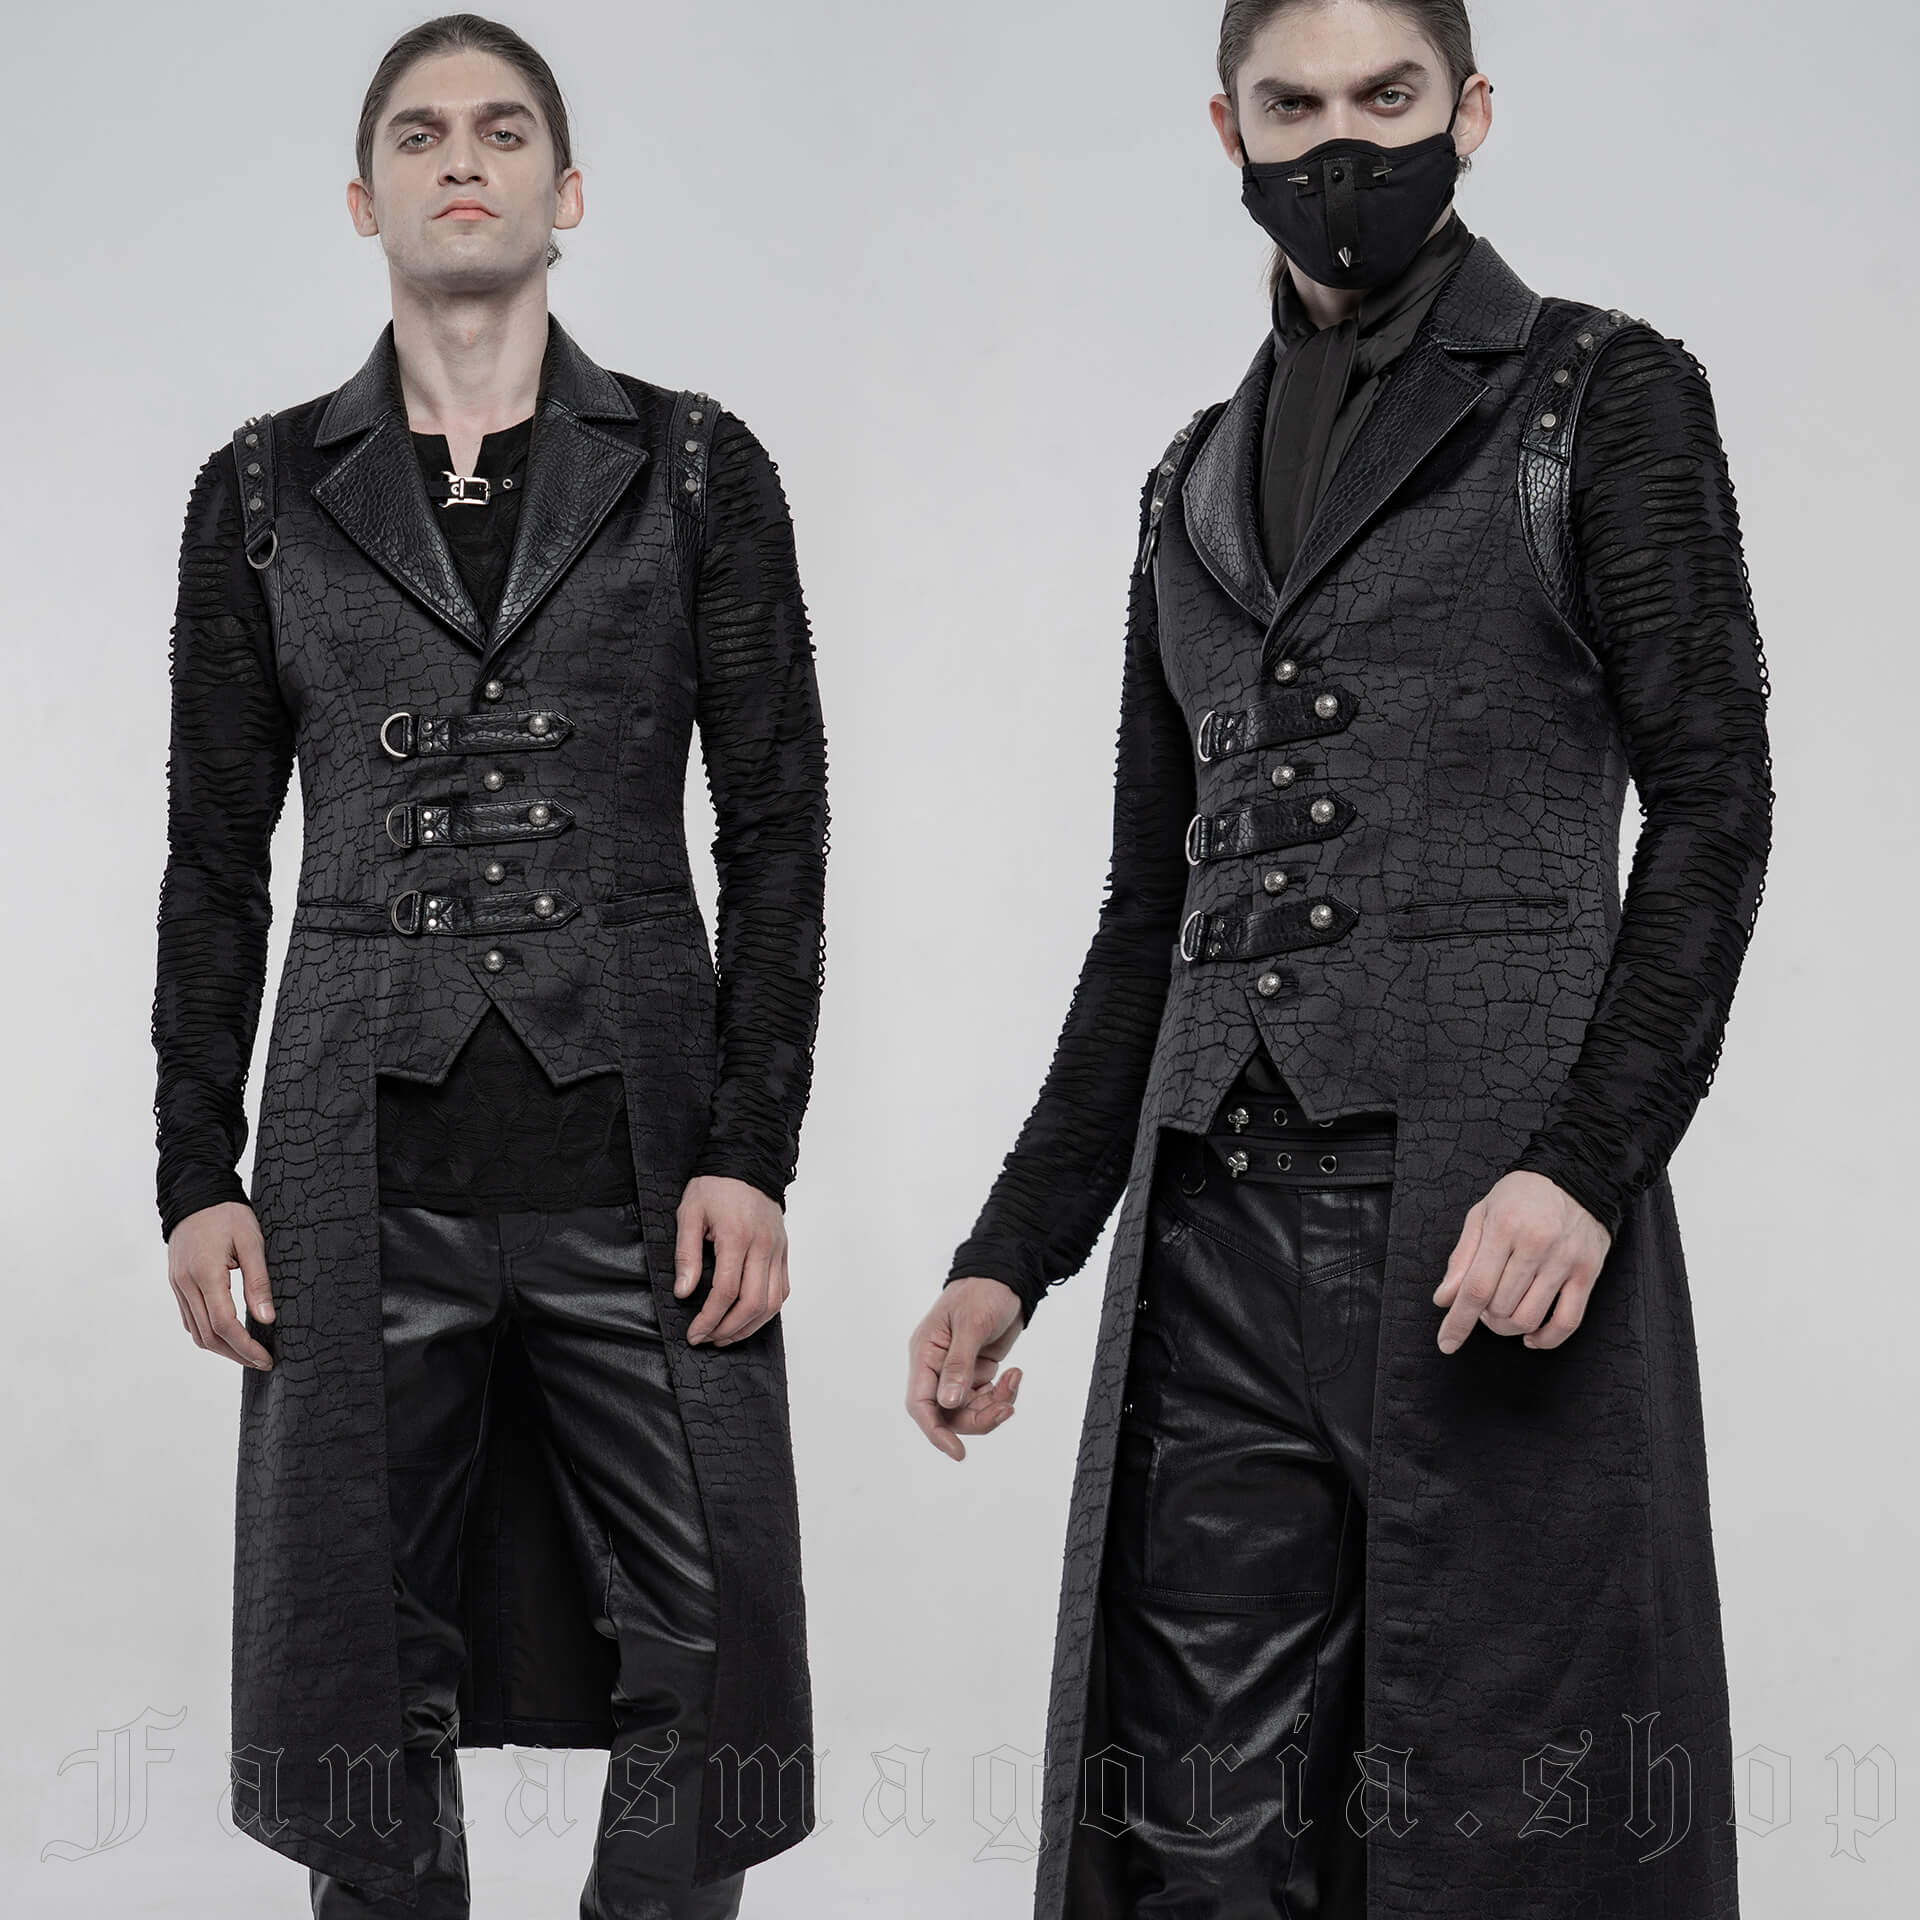 Morpheus Waistcoat WY-1254 by PUNK RAVE brand